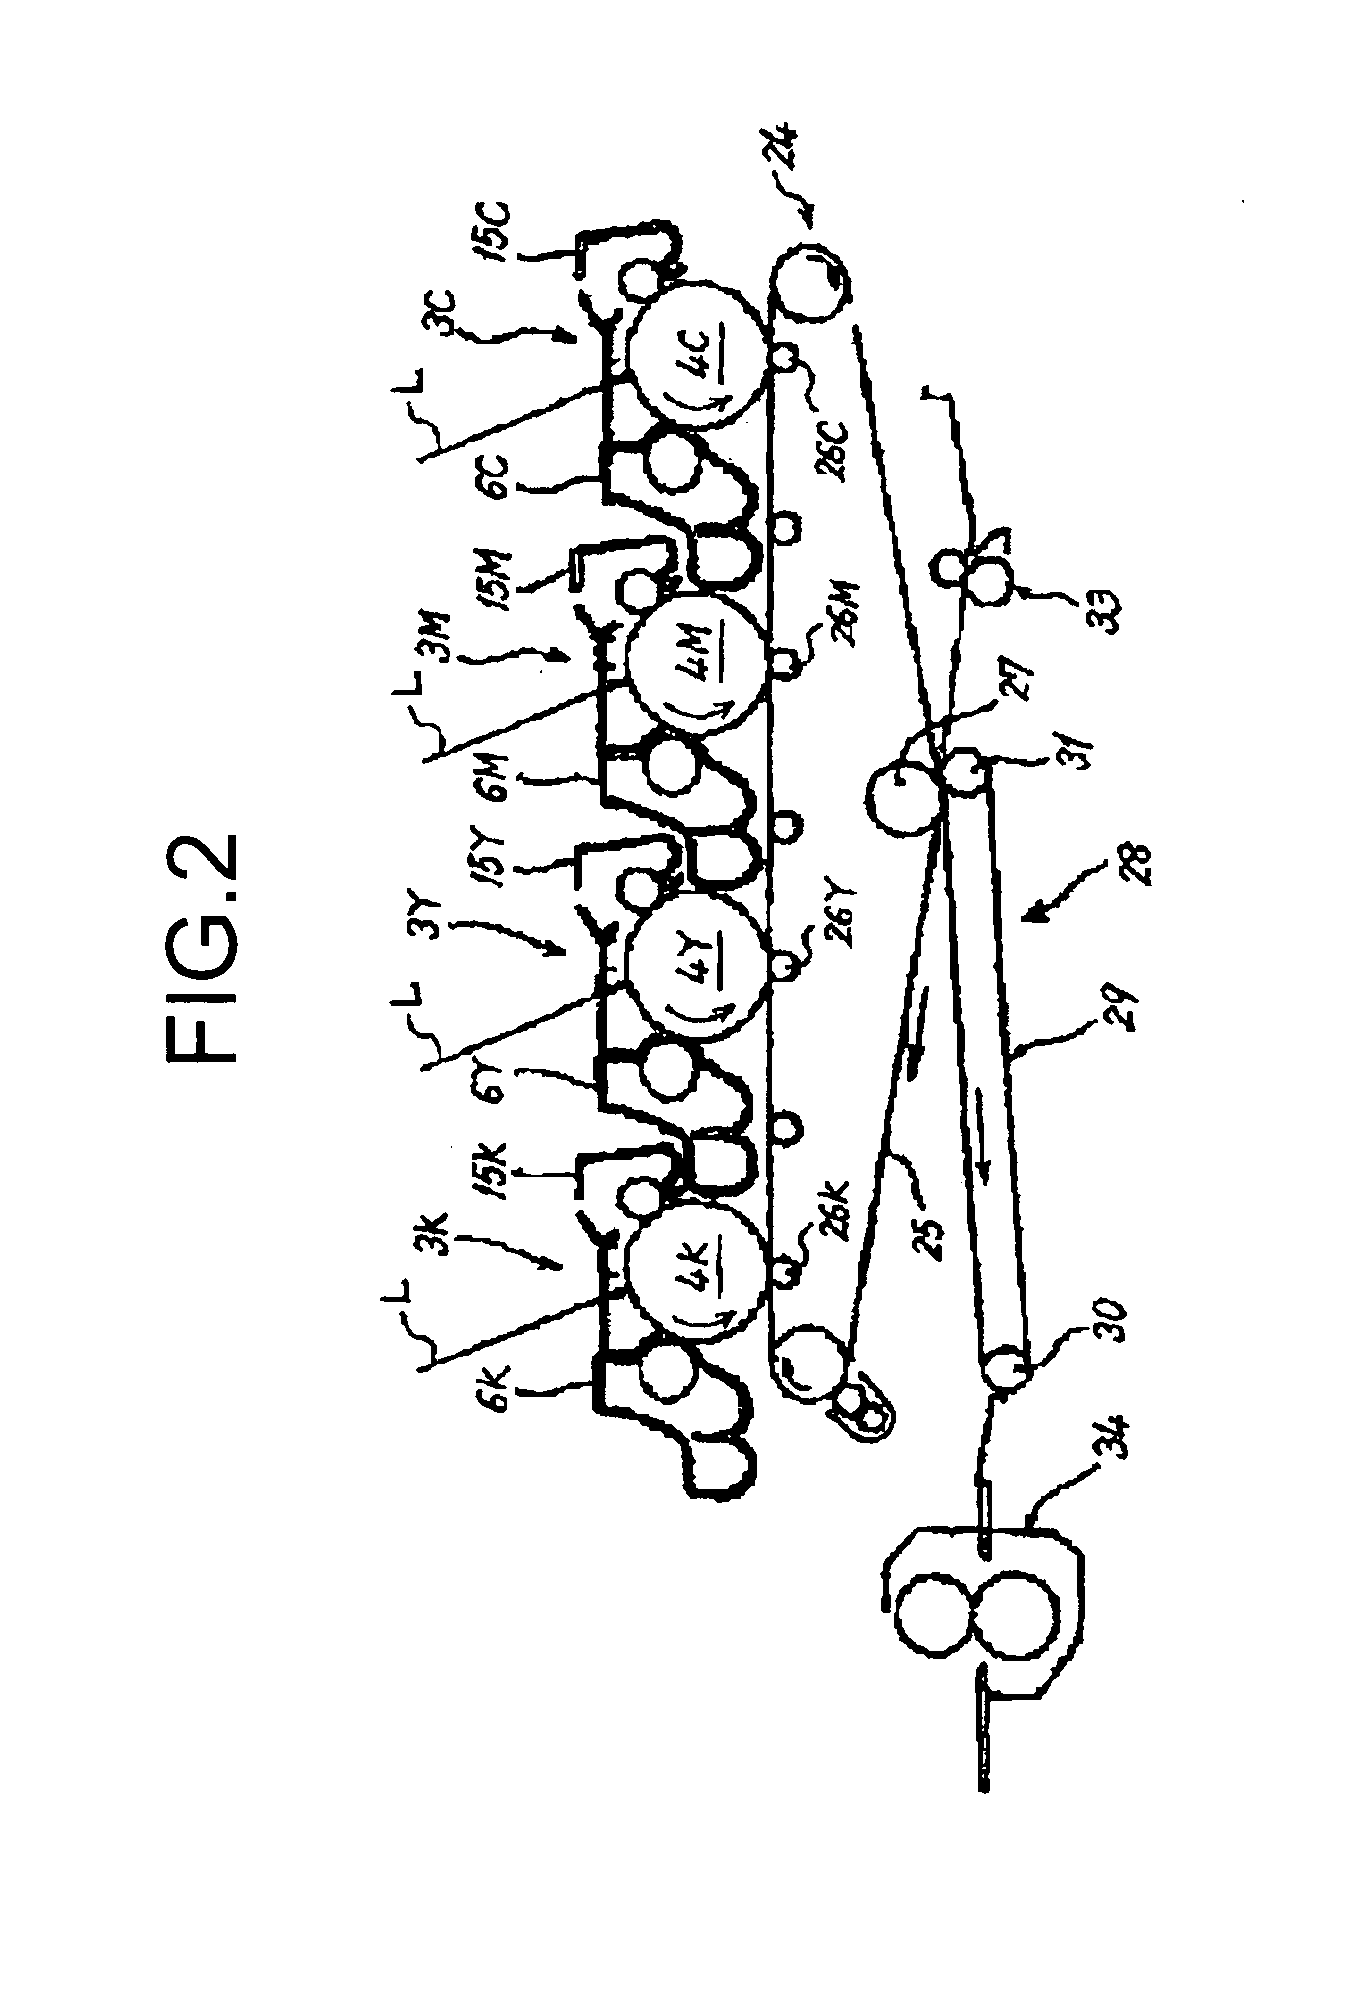 Image read device and copier